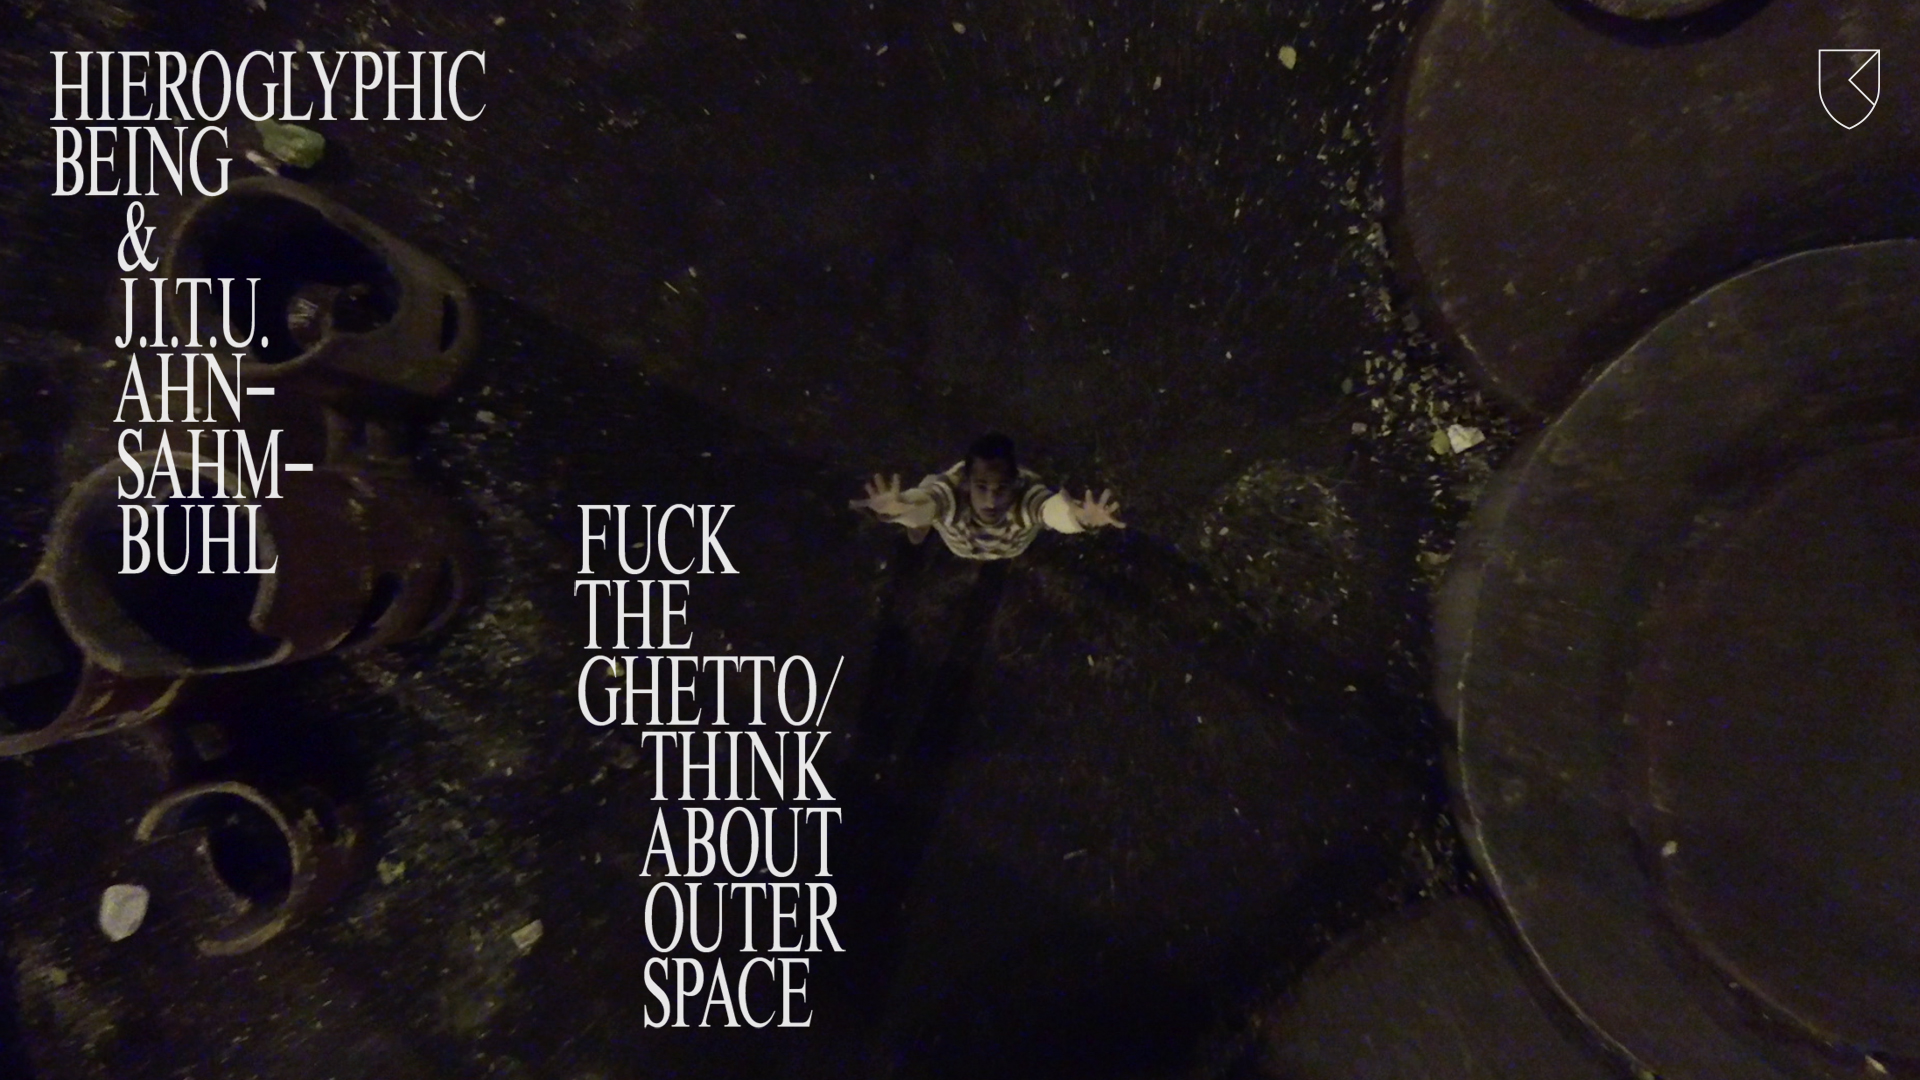 Link to Video for Hieroglyphic Being & J.I.T.U. Ahn Sahm Buhl – F**k The Ghetto / Think About Outer Space